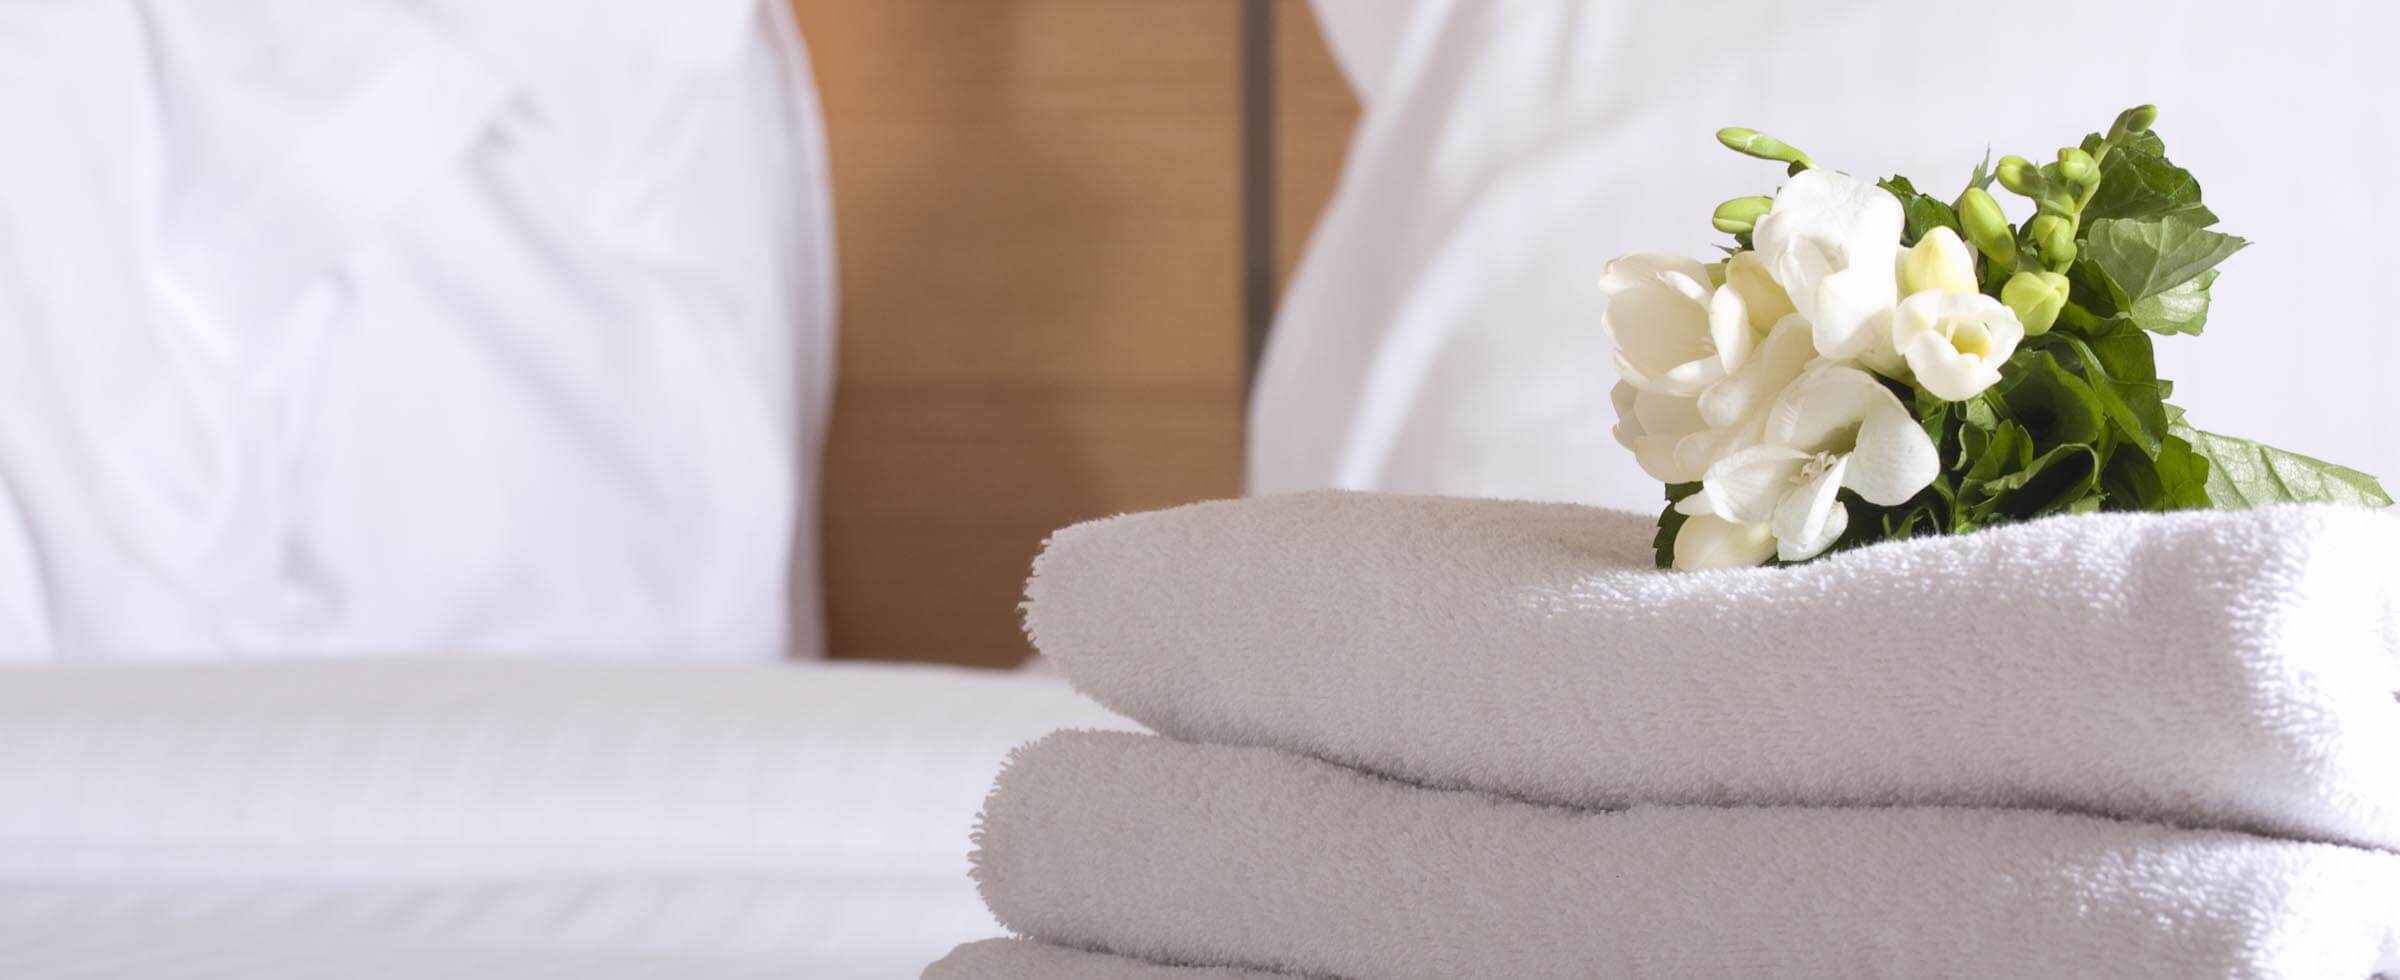 towels and flowers on bed in hotel